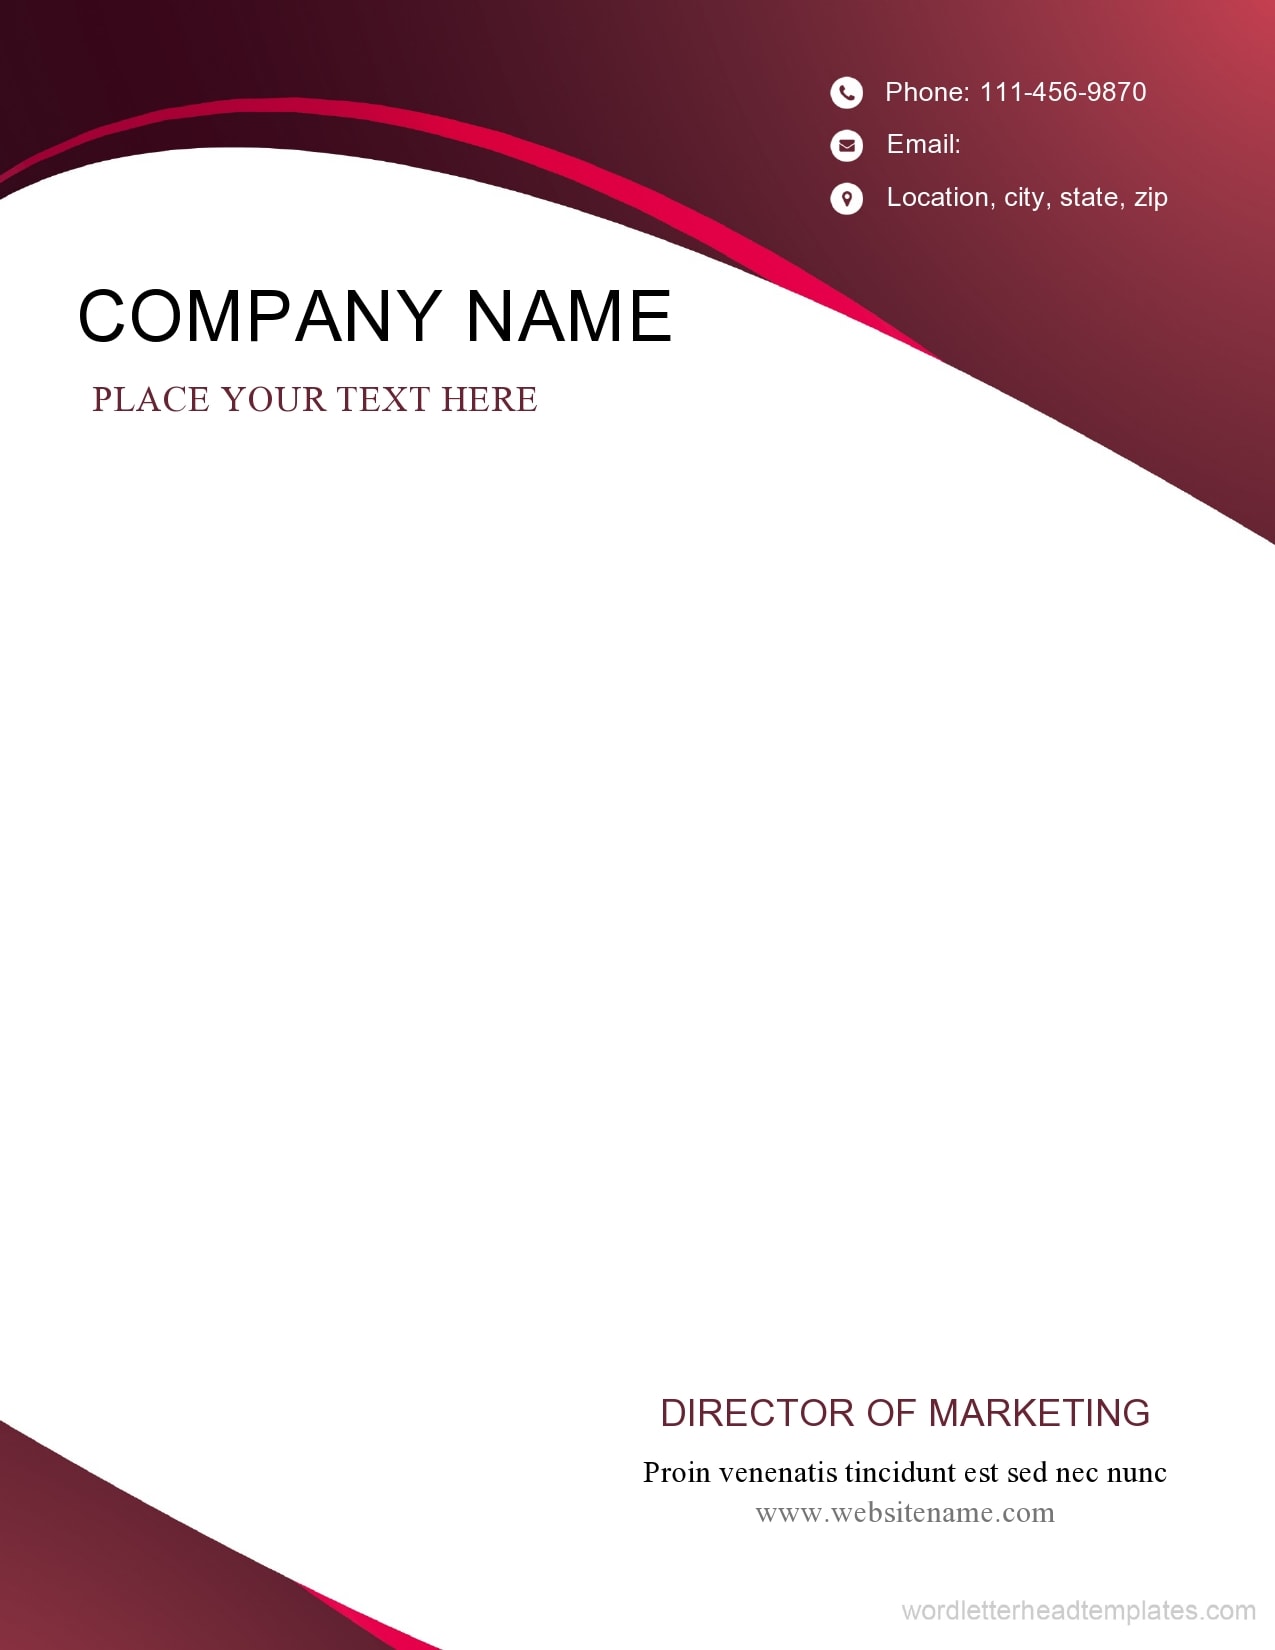 30 Professional Letterhead Formats & Examples TemplateArchive